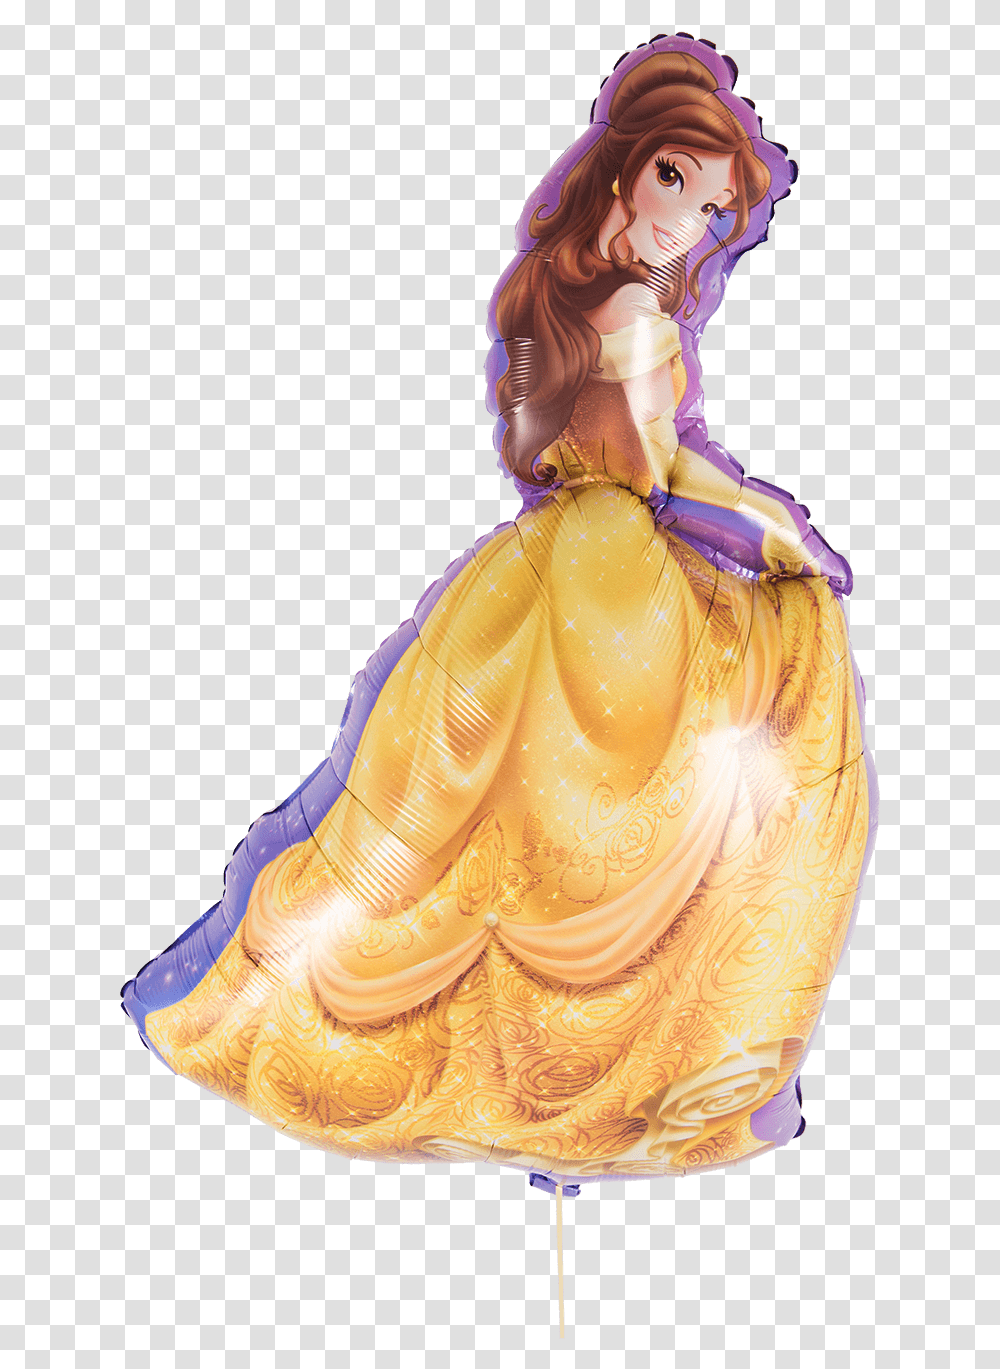 Disney Princess Belle Supershape Balloon Beauty And The Beast, Figurine, Doll, Toy, Person Transparent Png